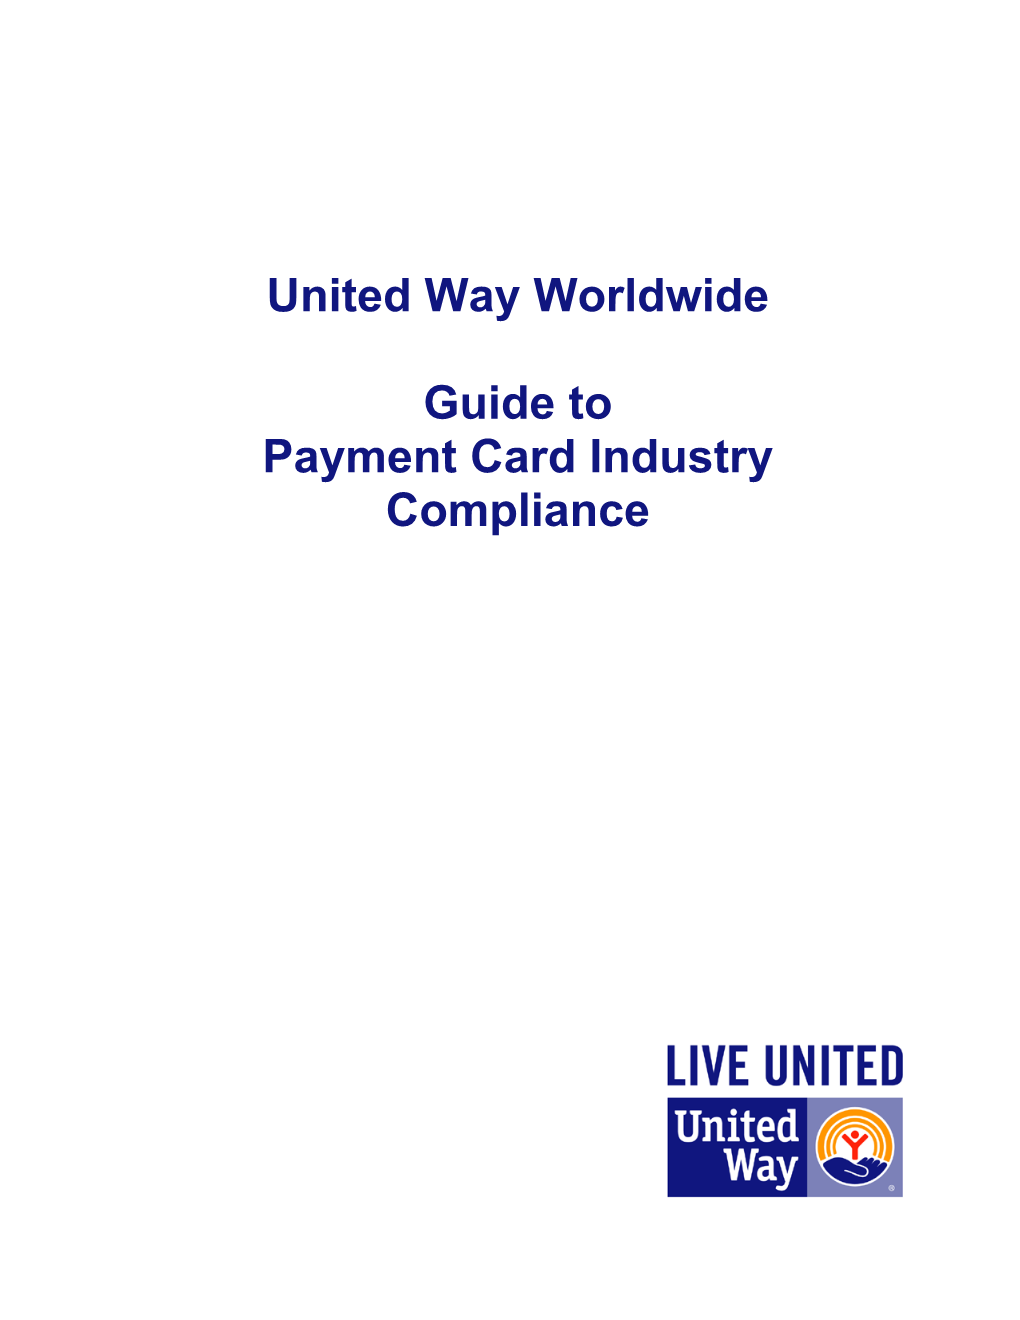 United Way Worldwide Guide to Payment Card Industry Compliance